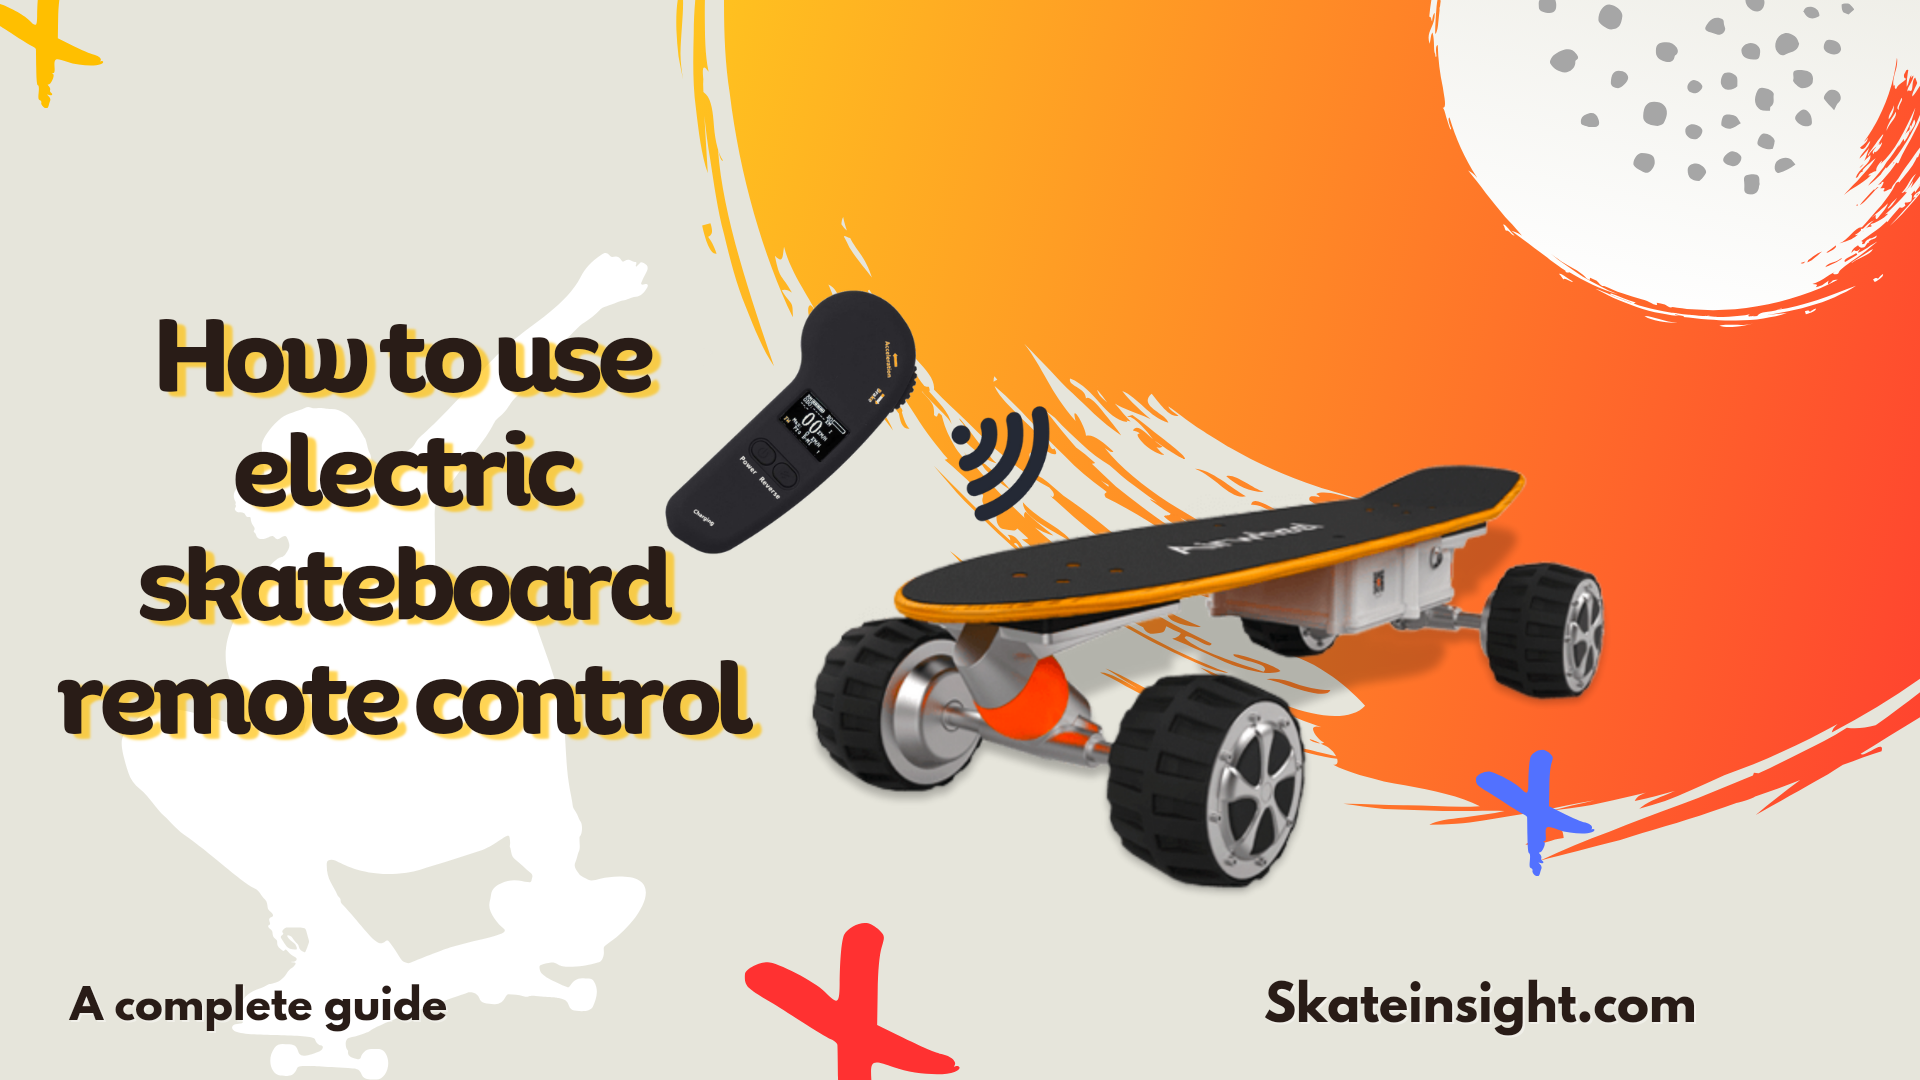 How to Use Electric Skateboard Remote Remote Guide